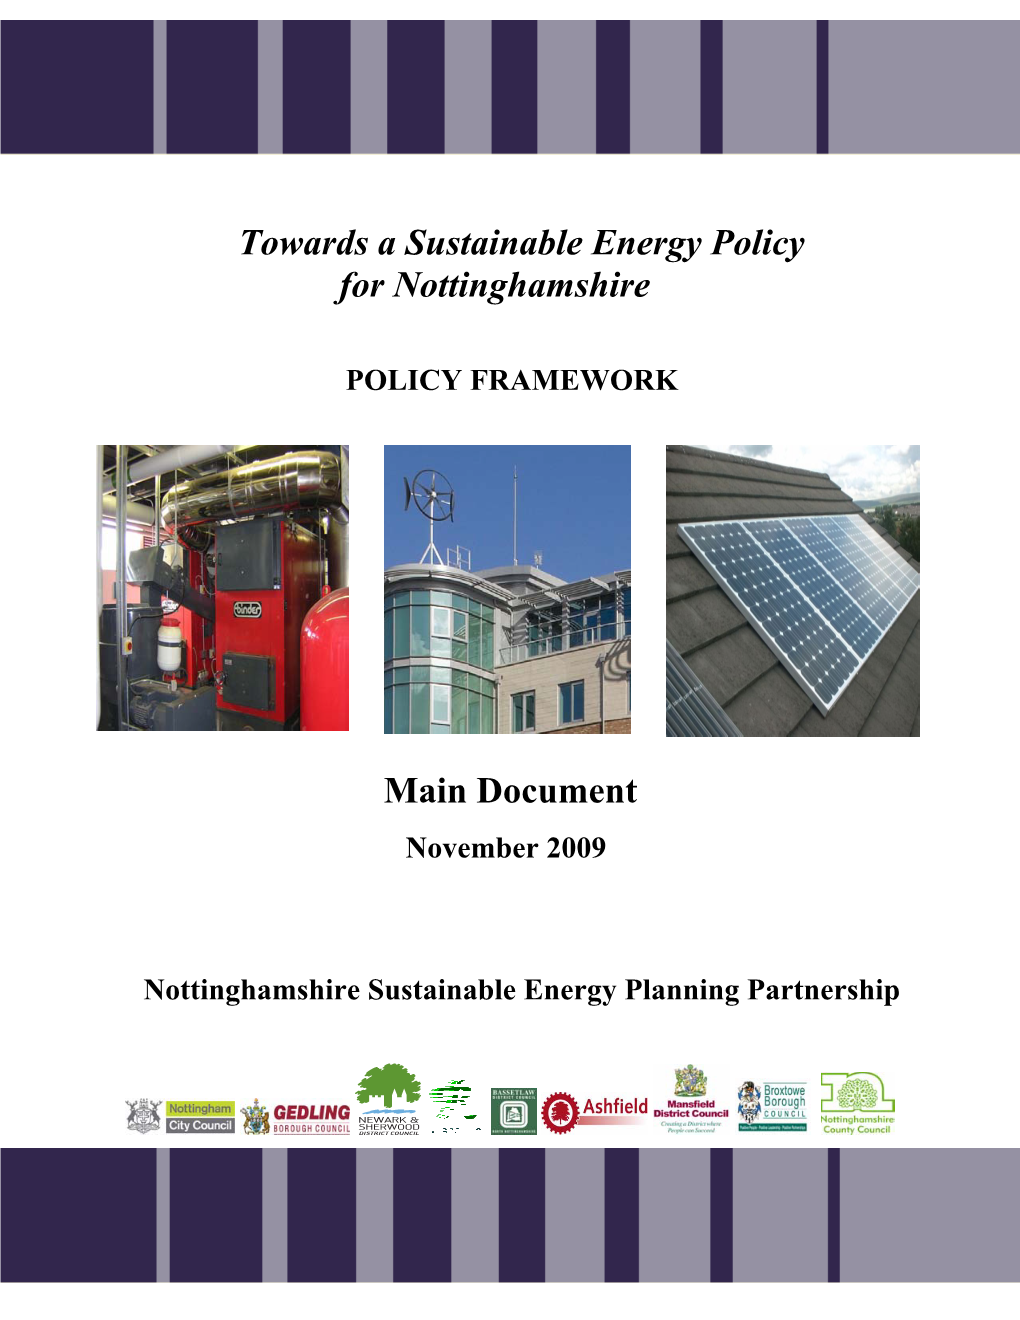 Towards a County Wide Sustainable Energy Policy for Nottinghamshire